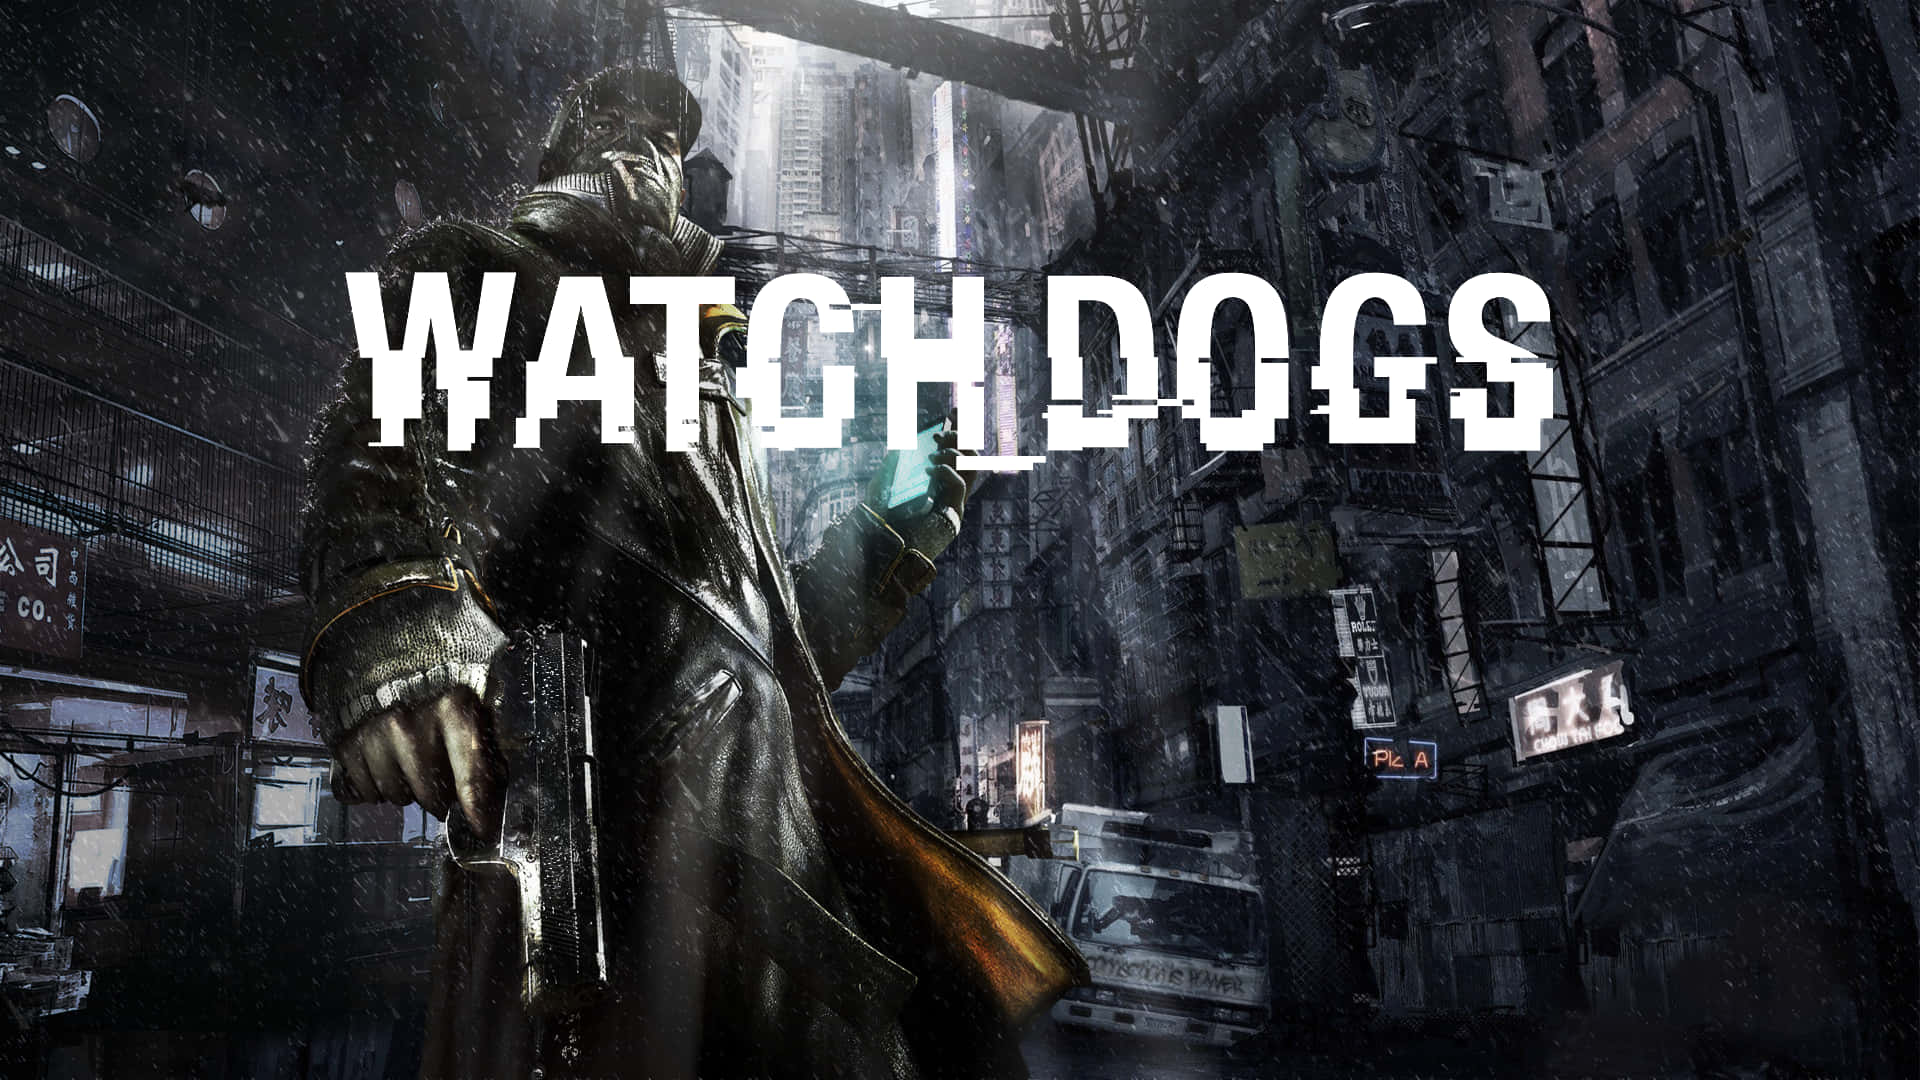 Watch Dogs Background Wallpaper